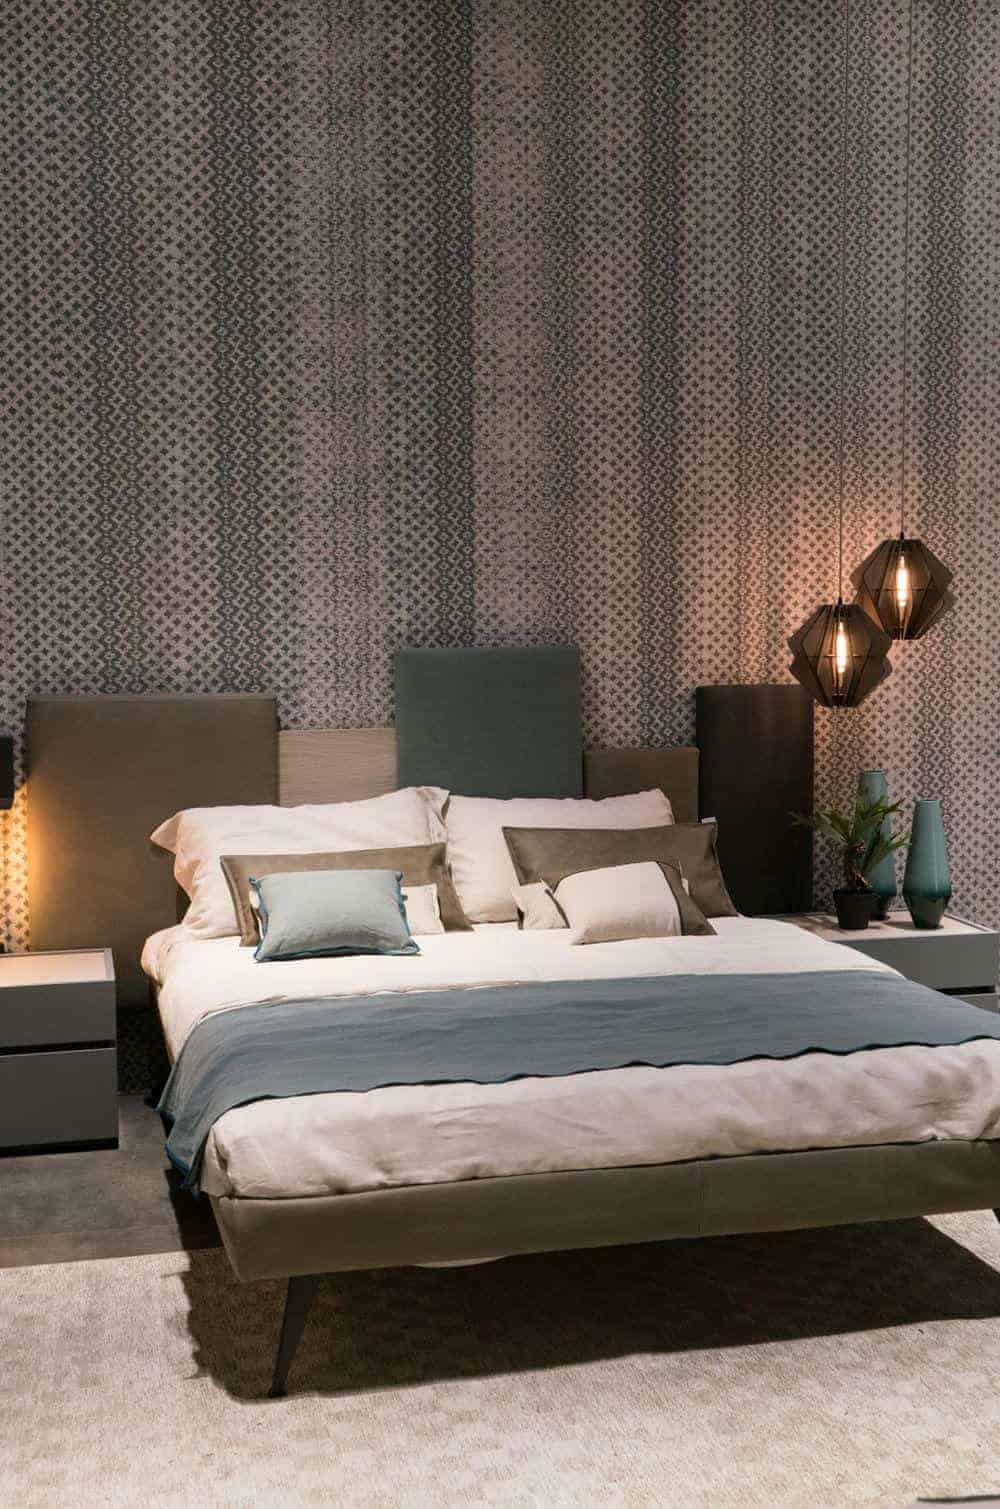 Modern bedroom decor with hanging lamps